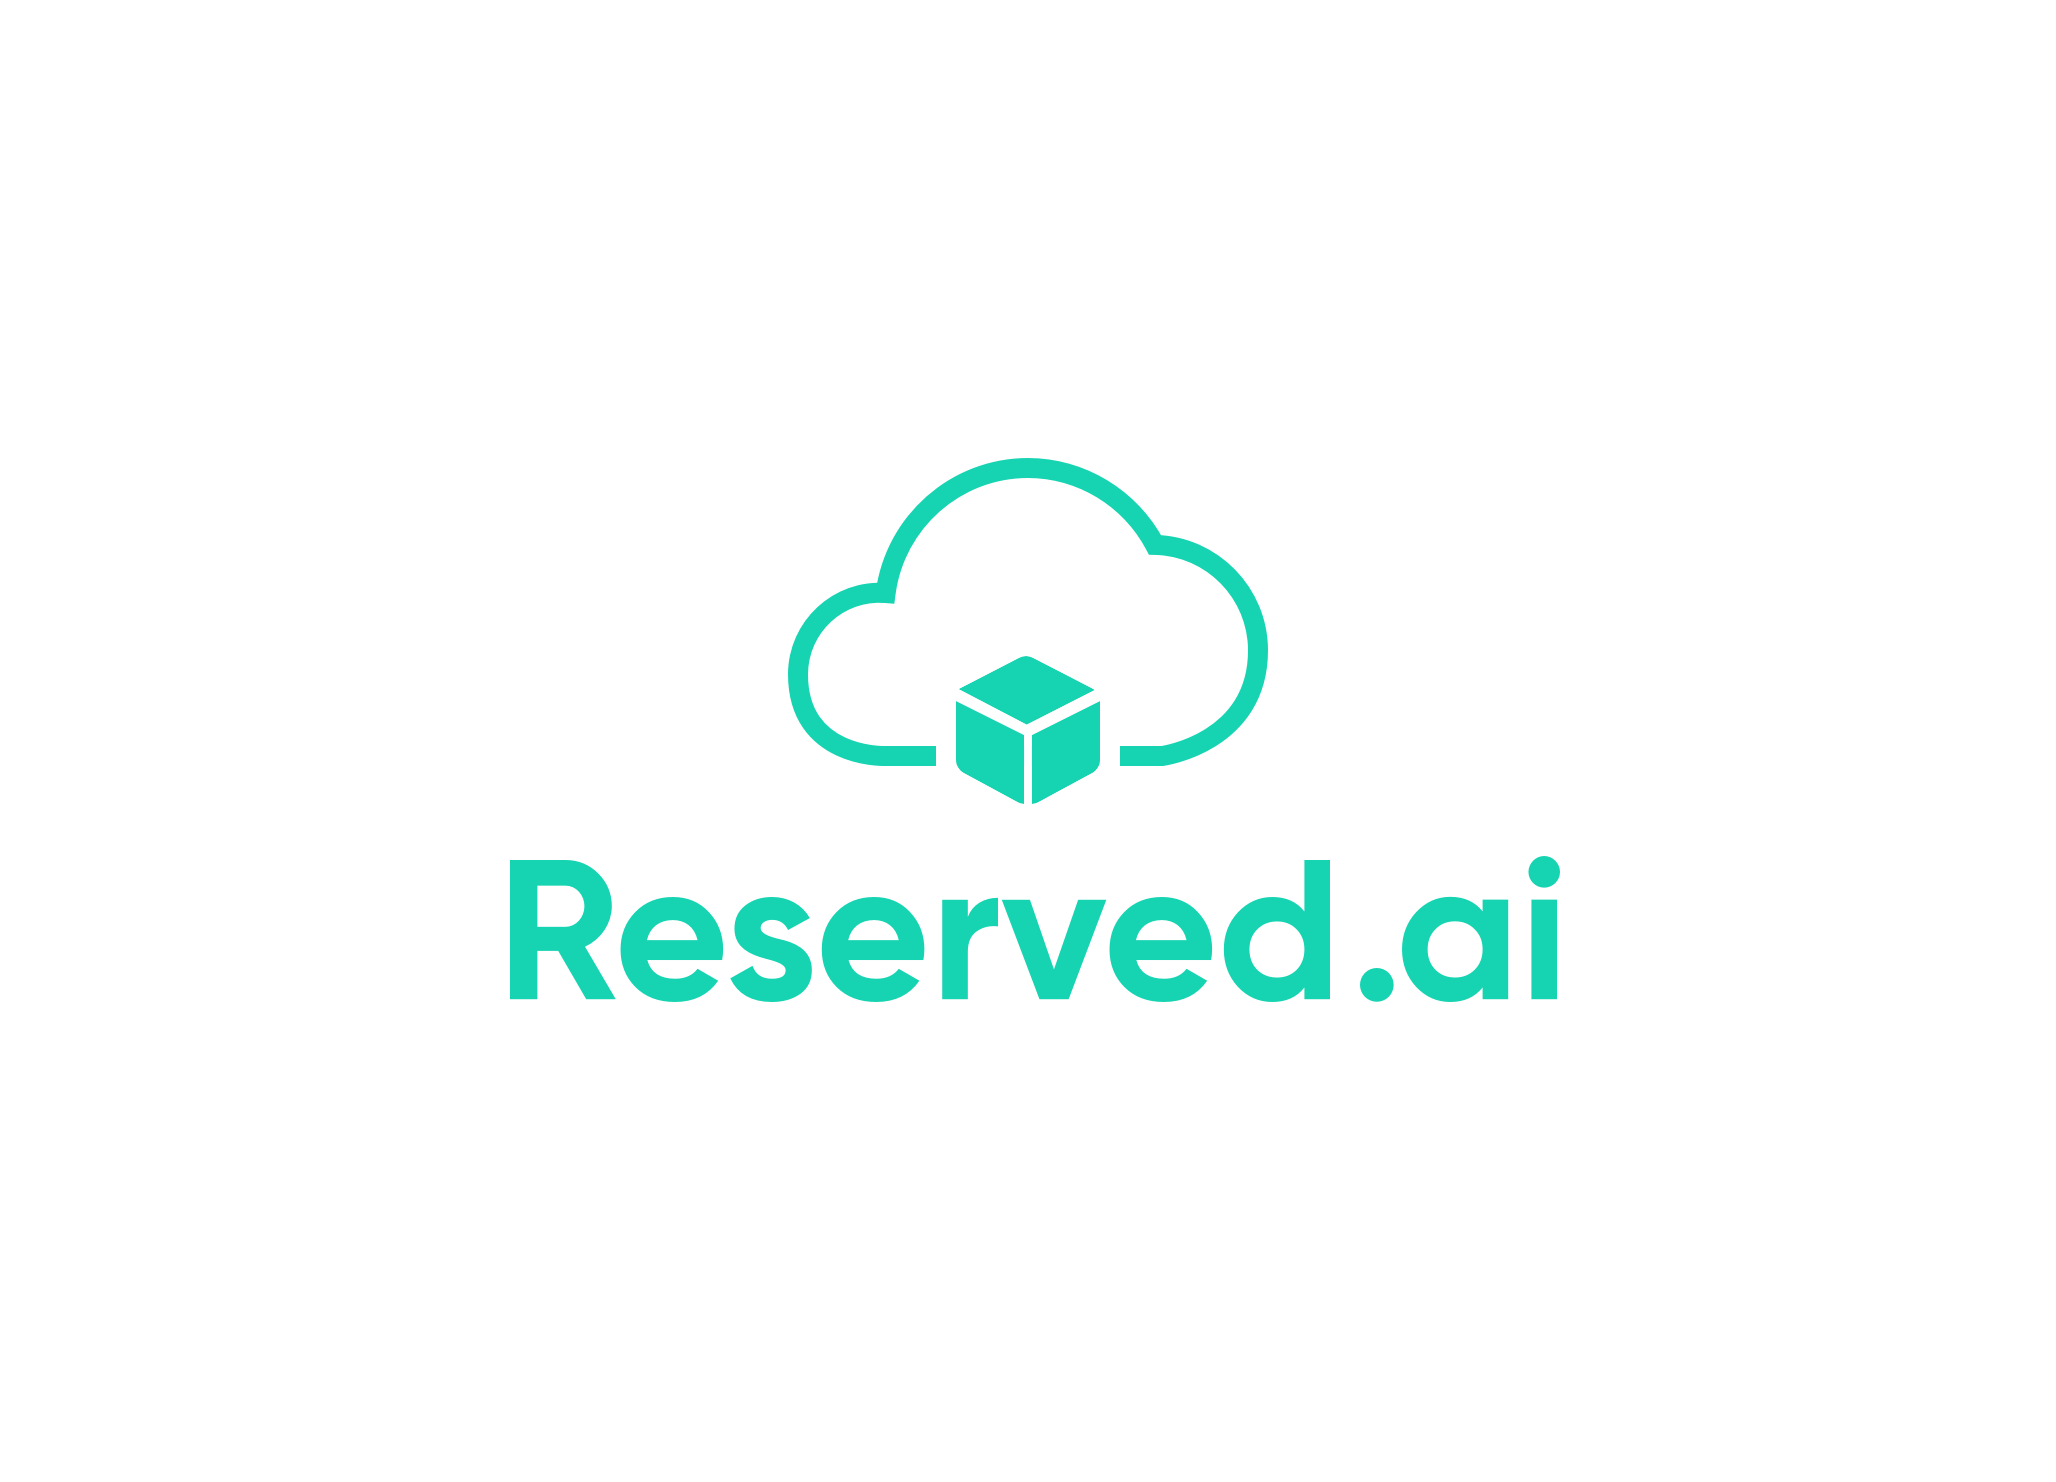 Reserved.ai